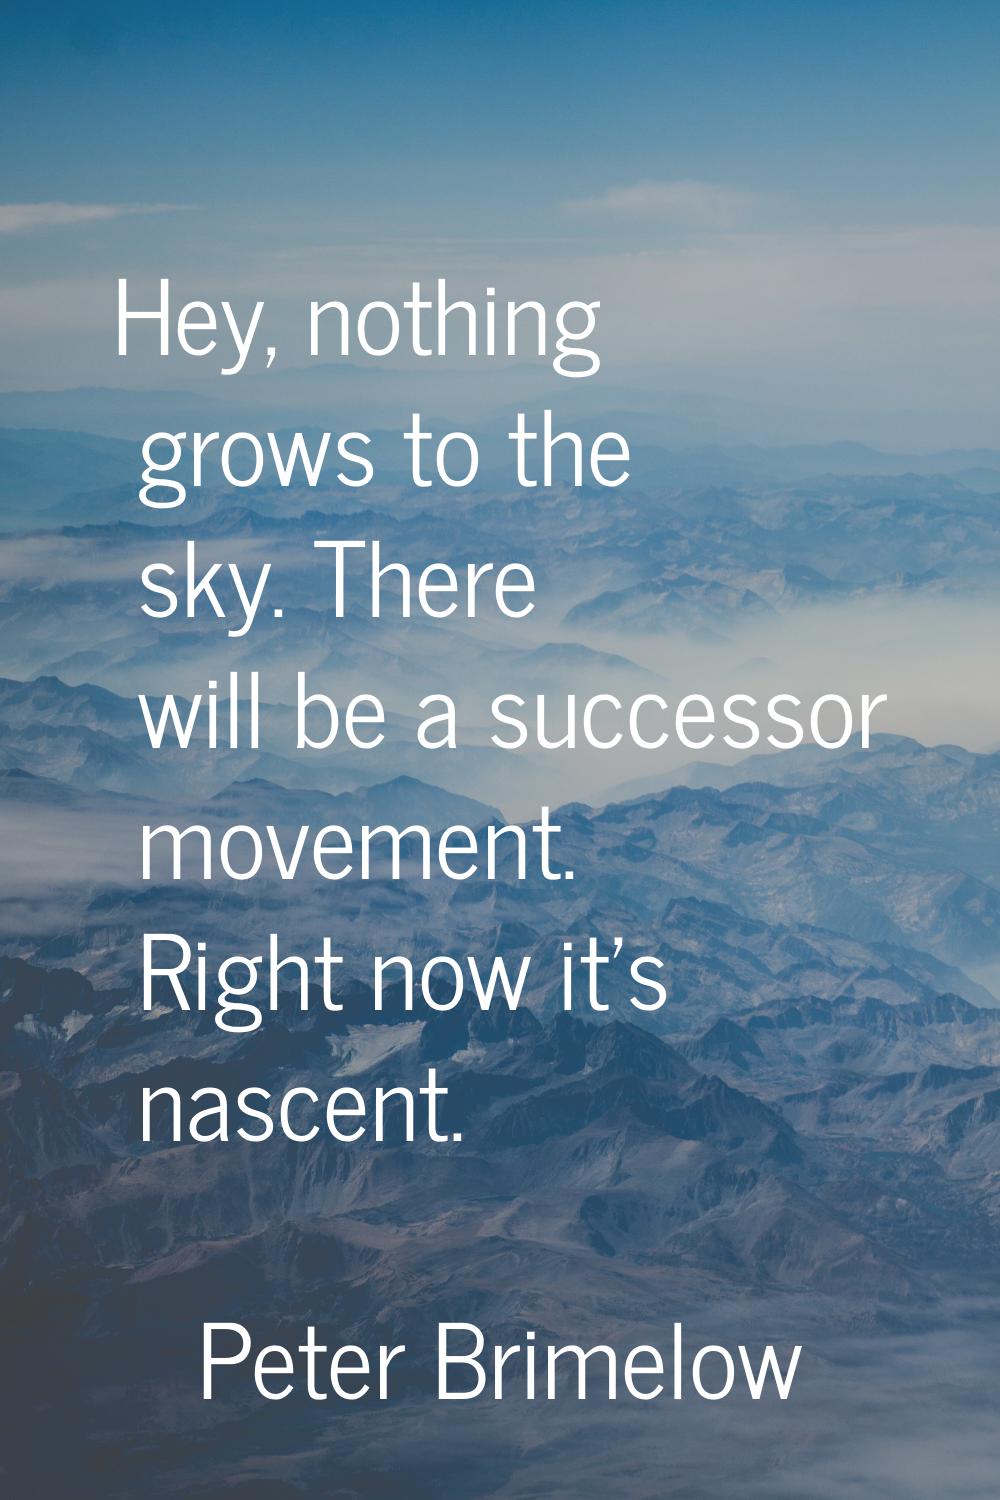 Hey, nothing grows to the sky. There will be a successor movement. Right now it's nascent.